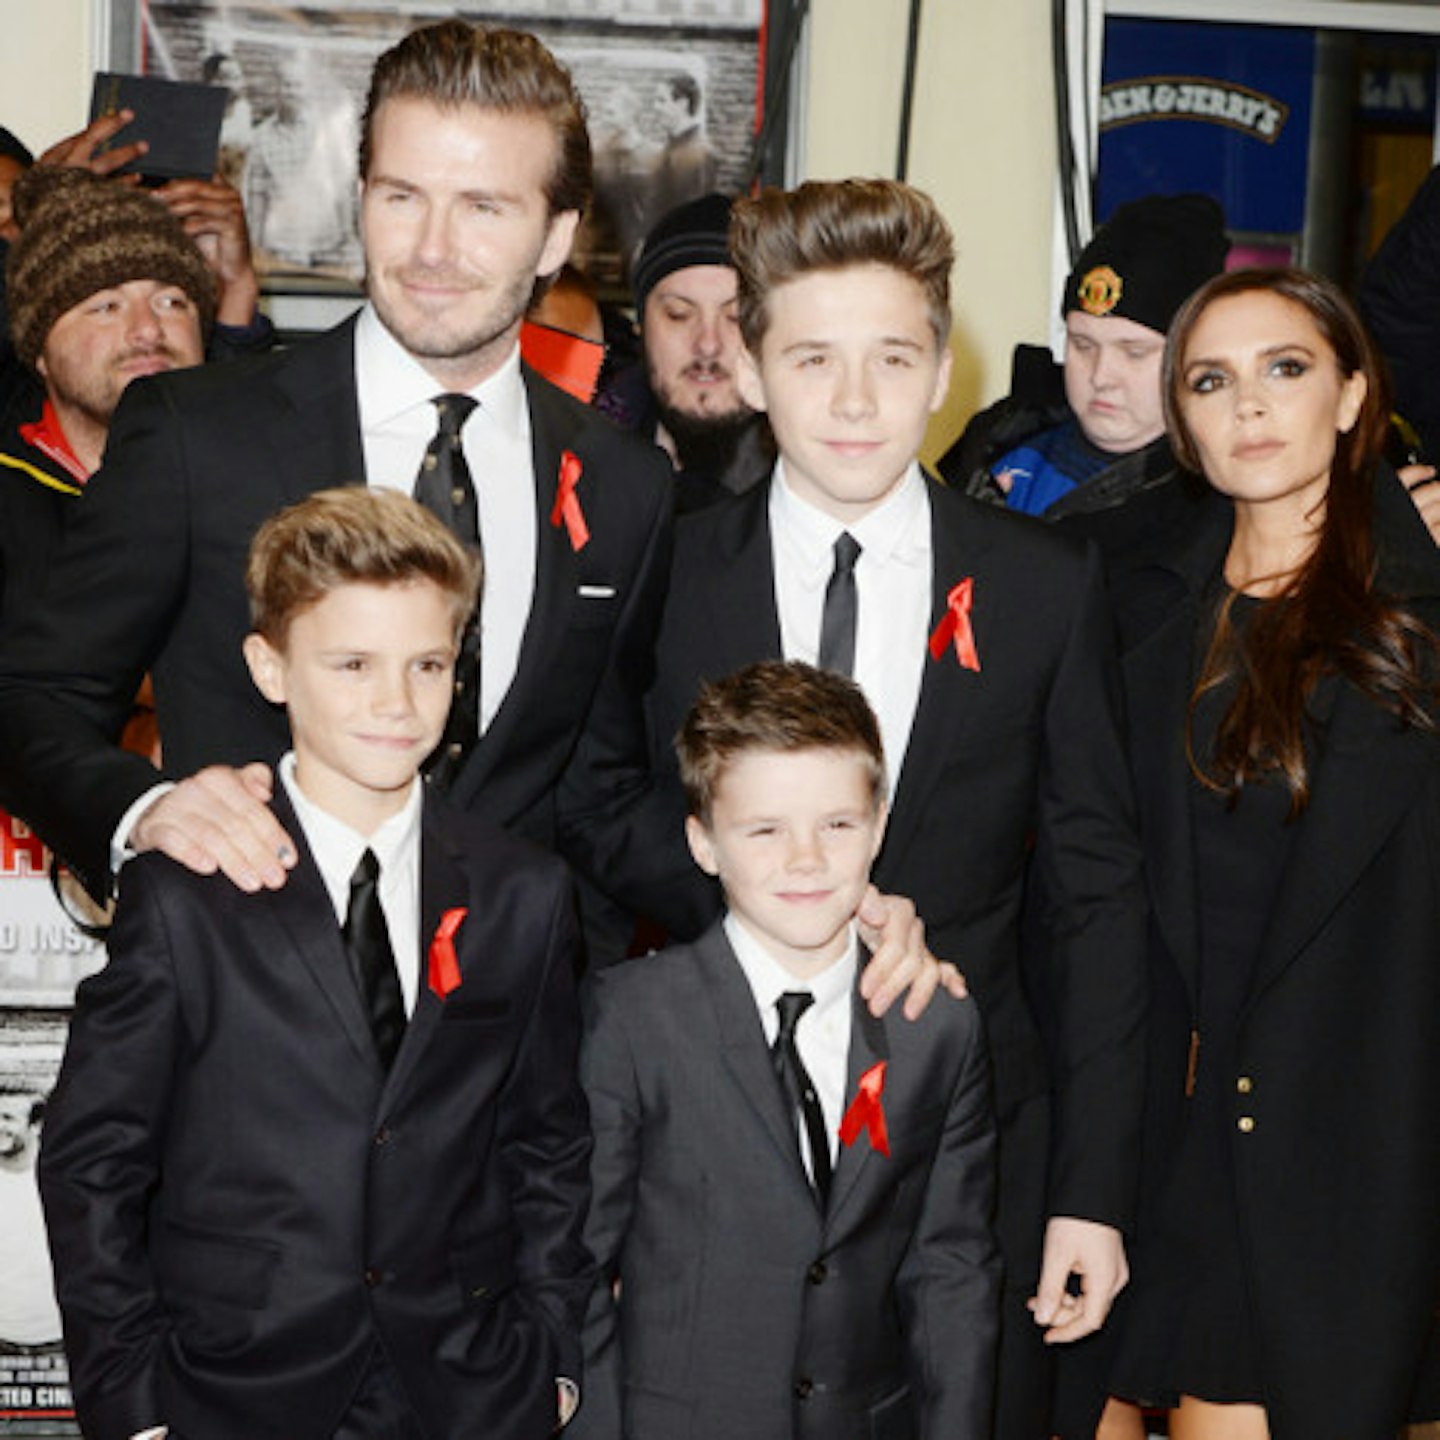 The Beckhams got married in 1999, and have had four children together